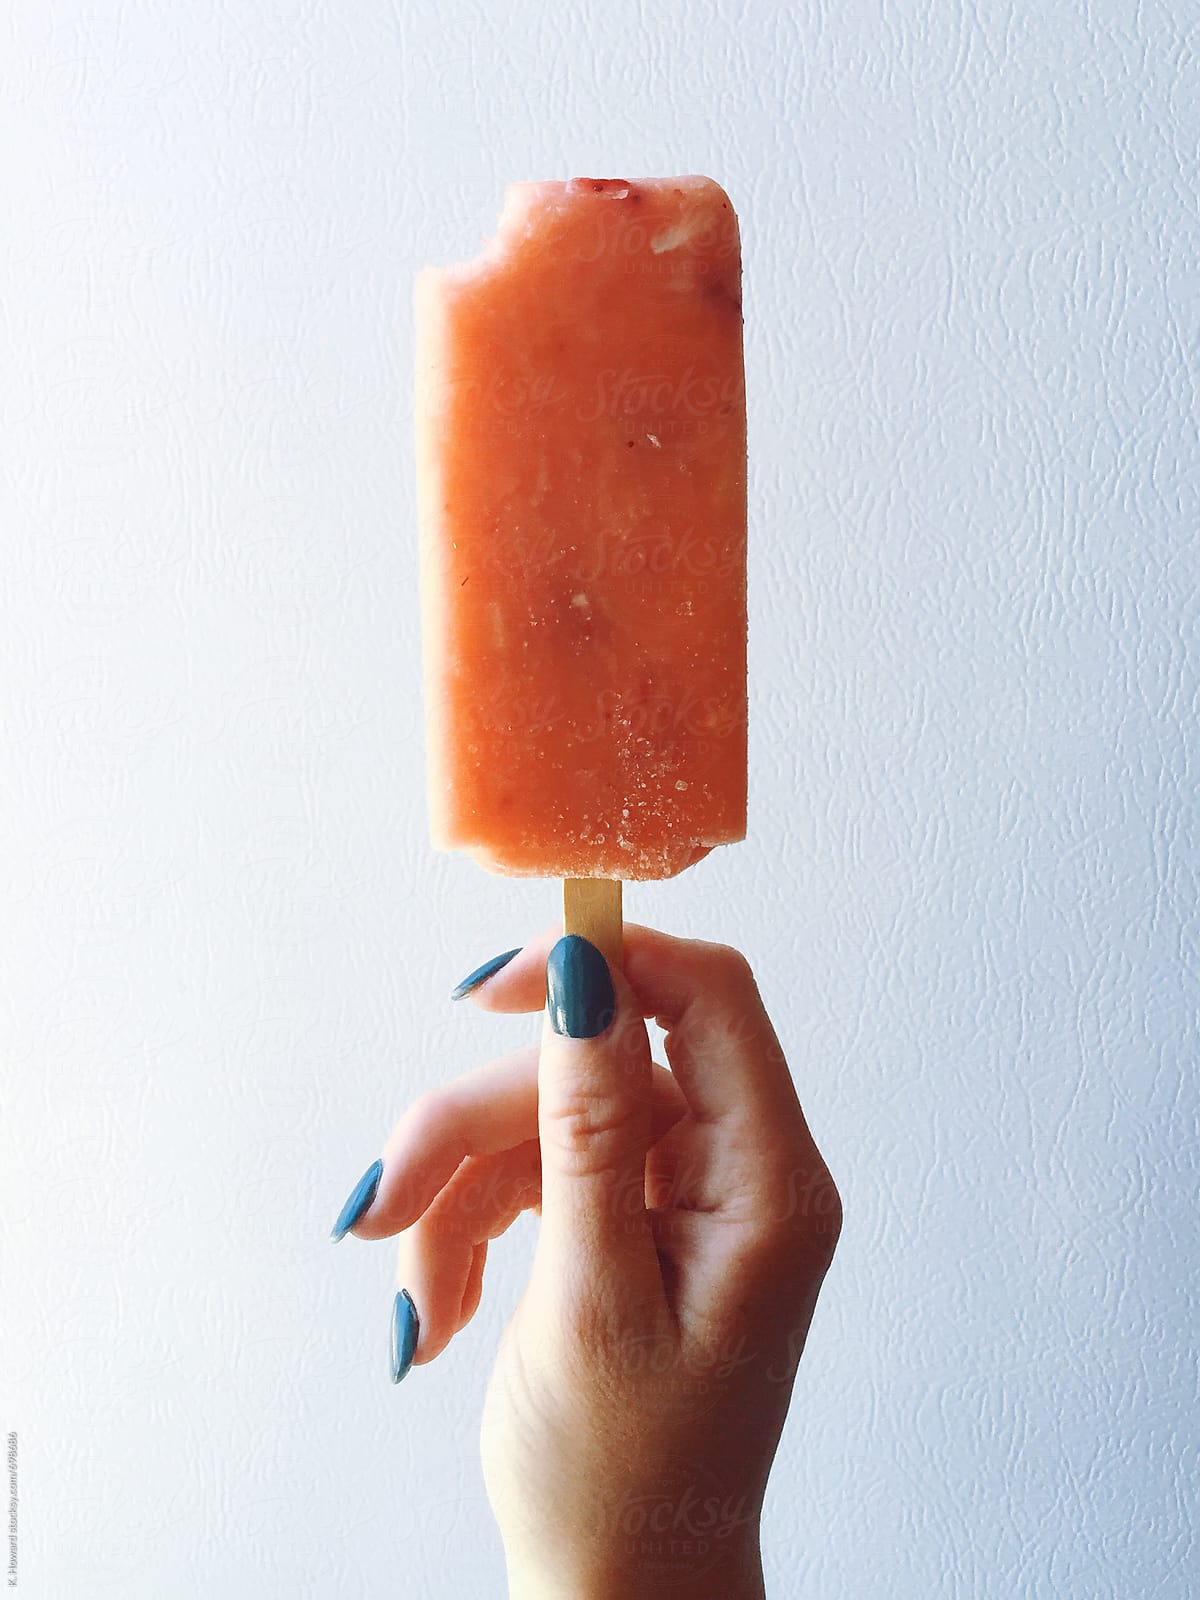 Hand holding Popsicle.